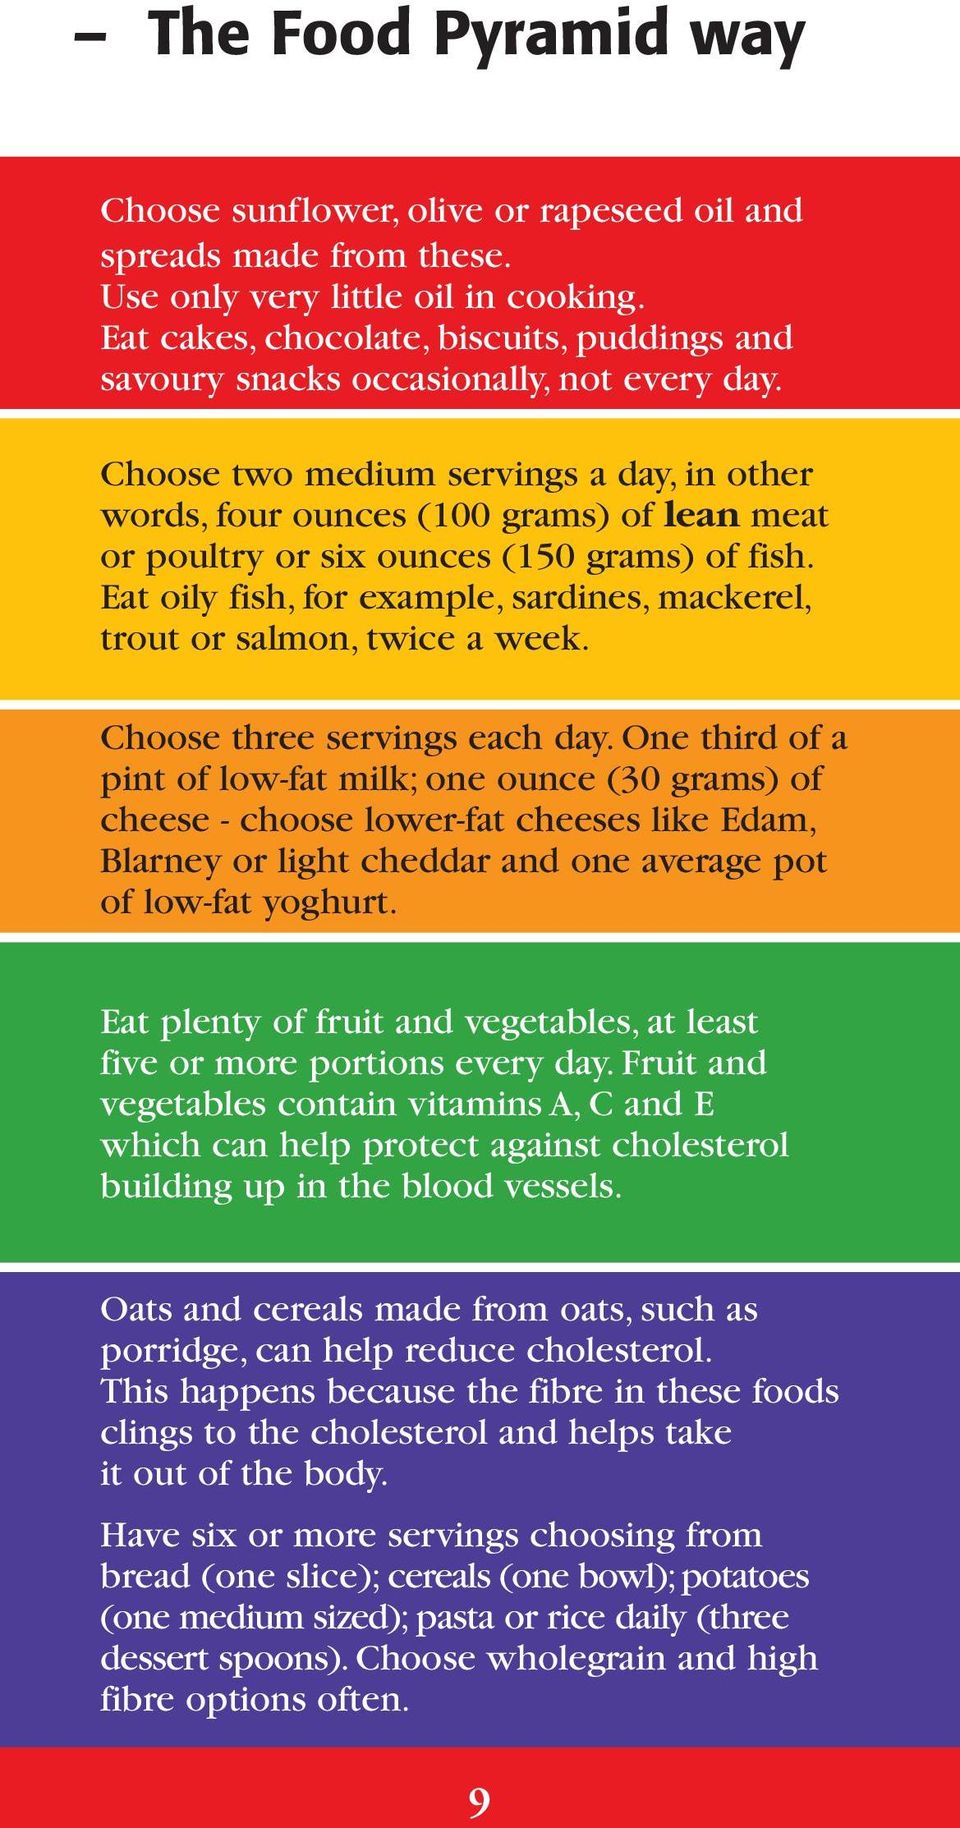 Choose two medium servings a day, in other words, four ounces (100 grams) of lean meat or poultry or six ounces (150 grams) of fish.